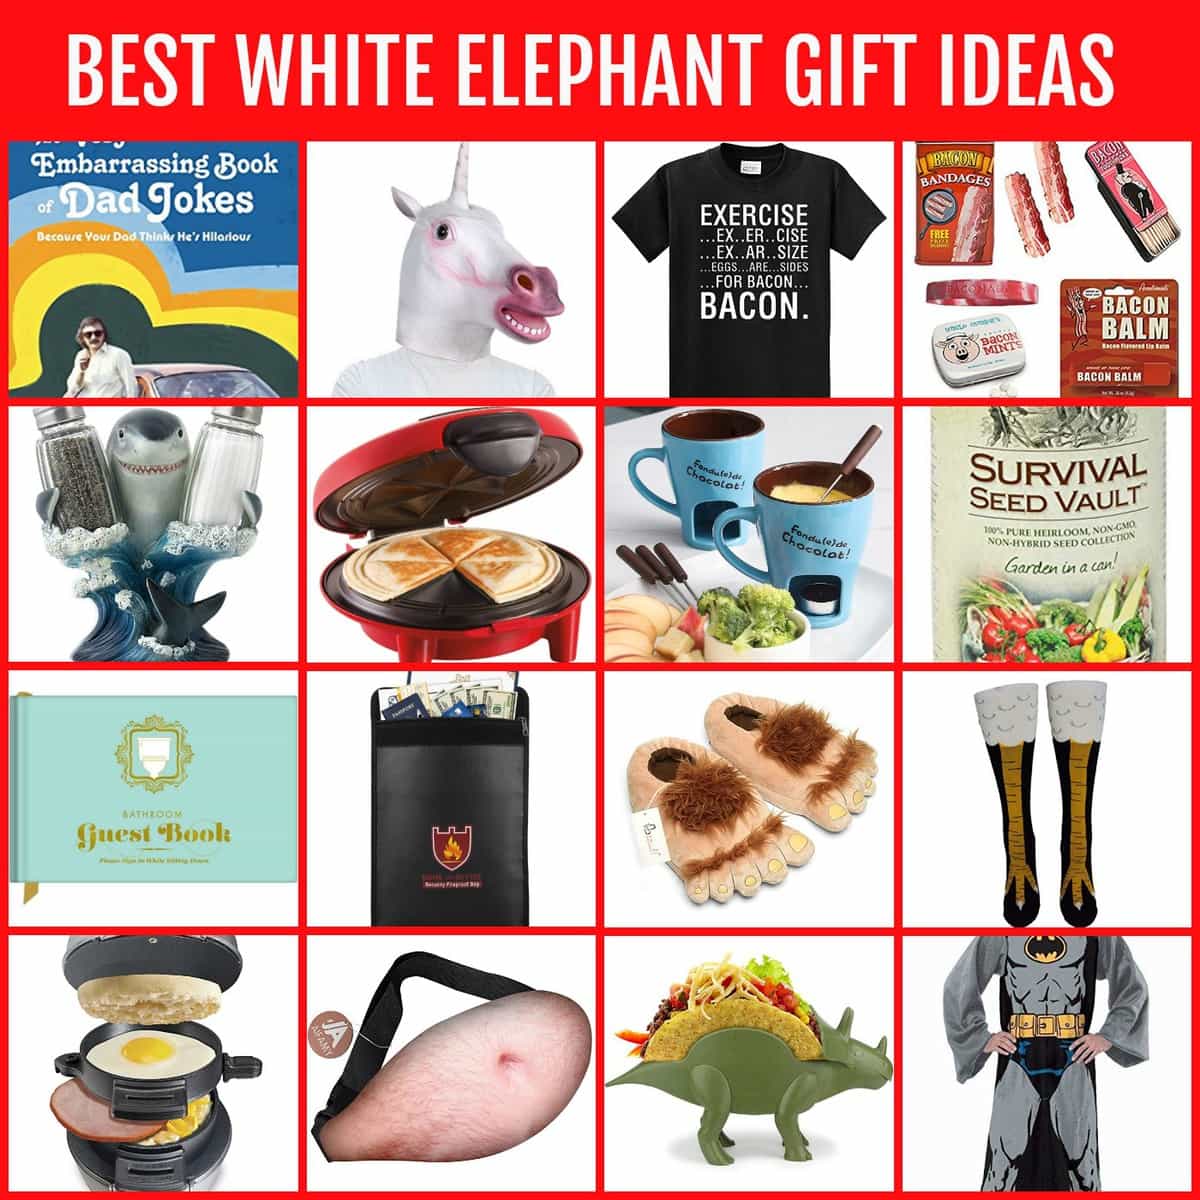 Best White Elephant Gifts